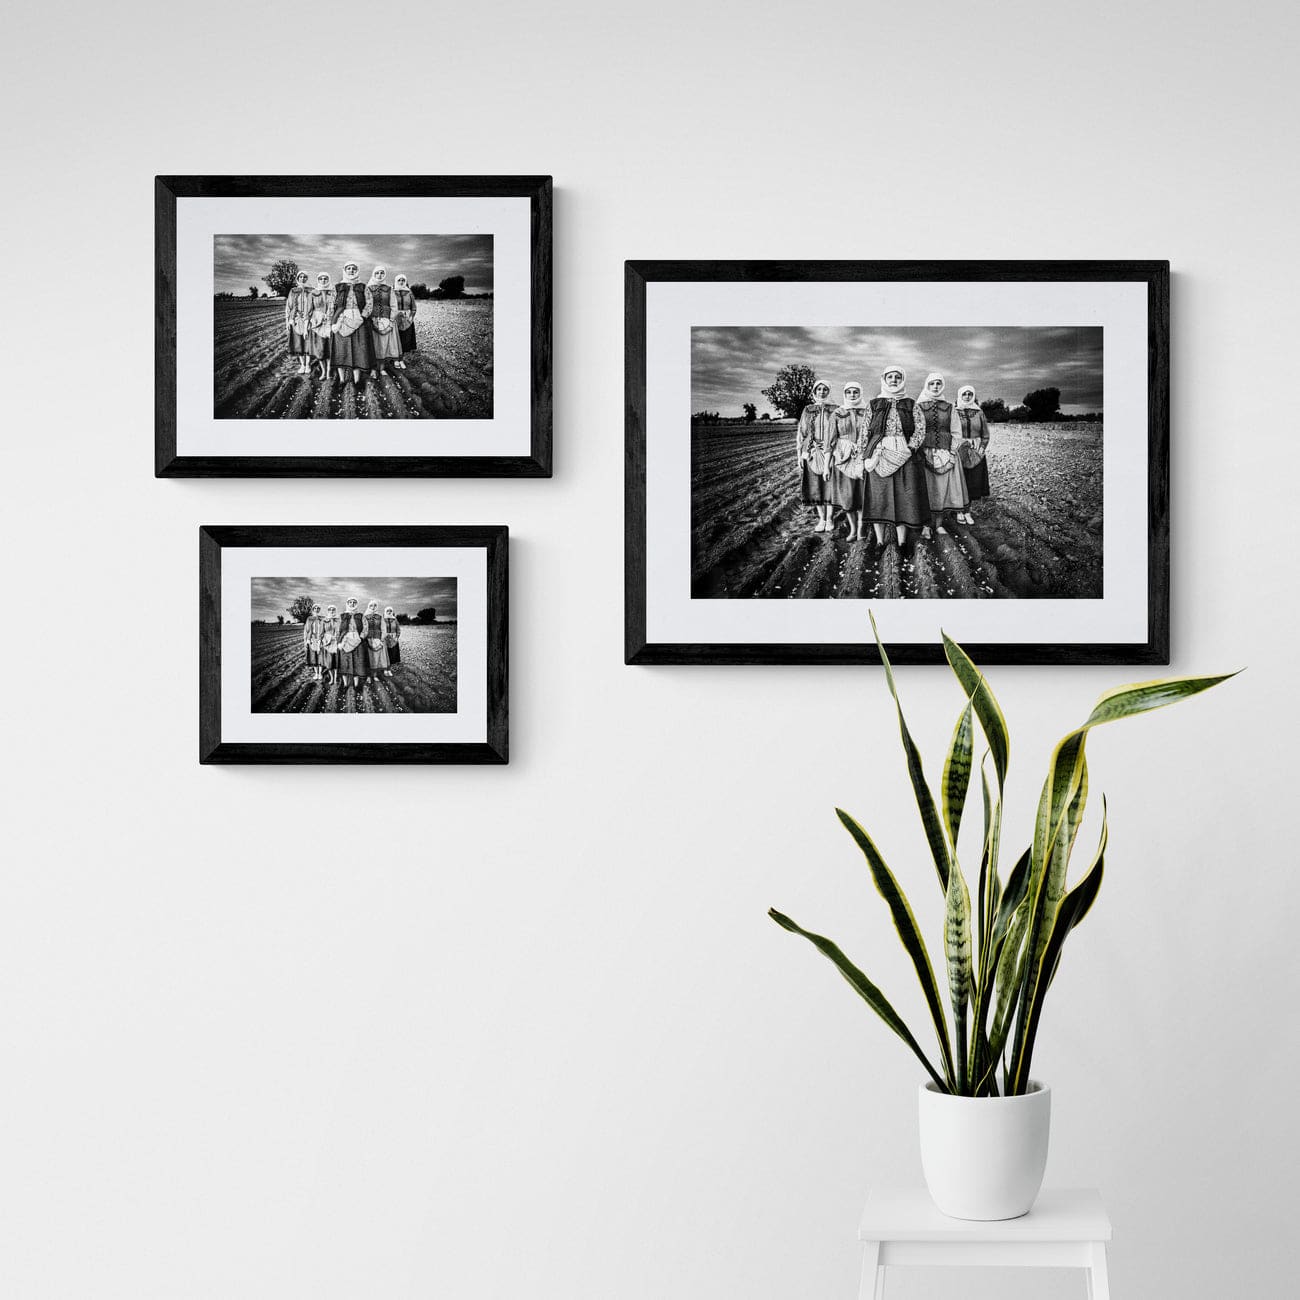 Black and White Photography Wall Art Greece | Garlic field Vyssa Thrace by George Tatakis - framing options